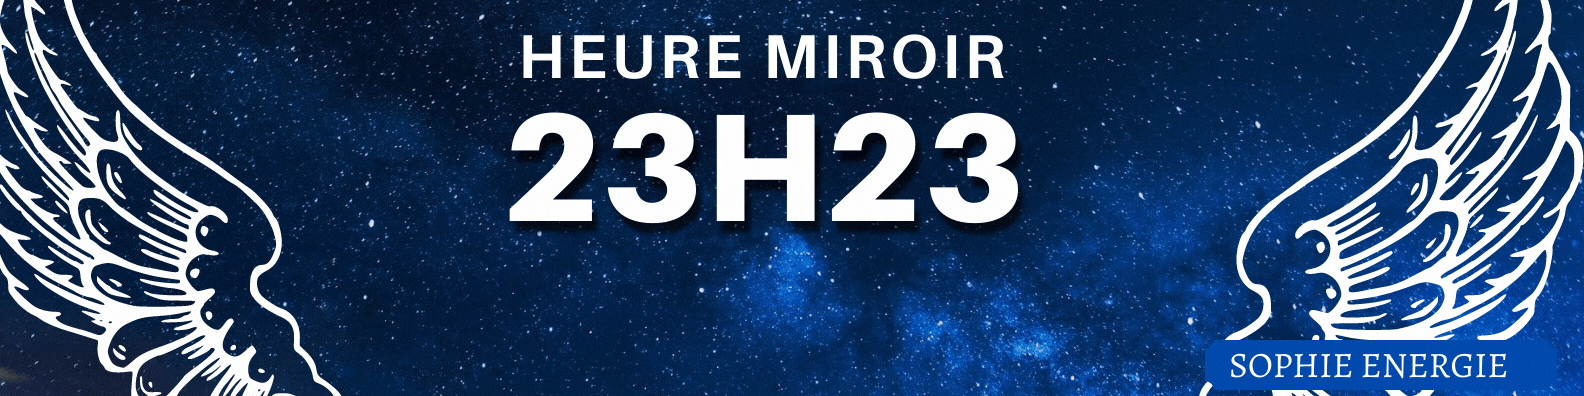 HEURE MIROIR anges 23h23